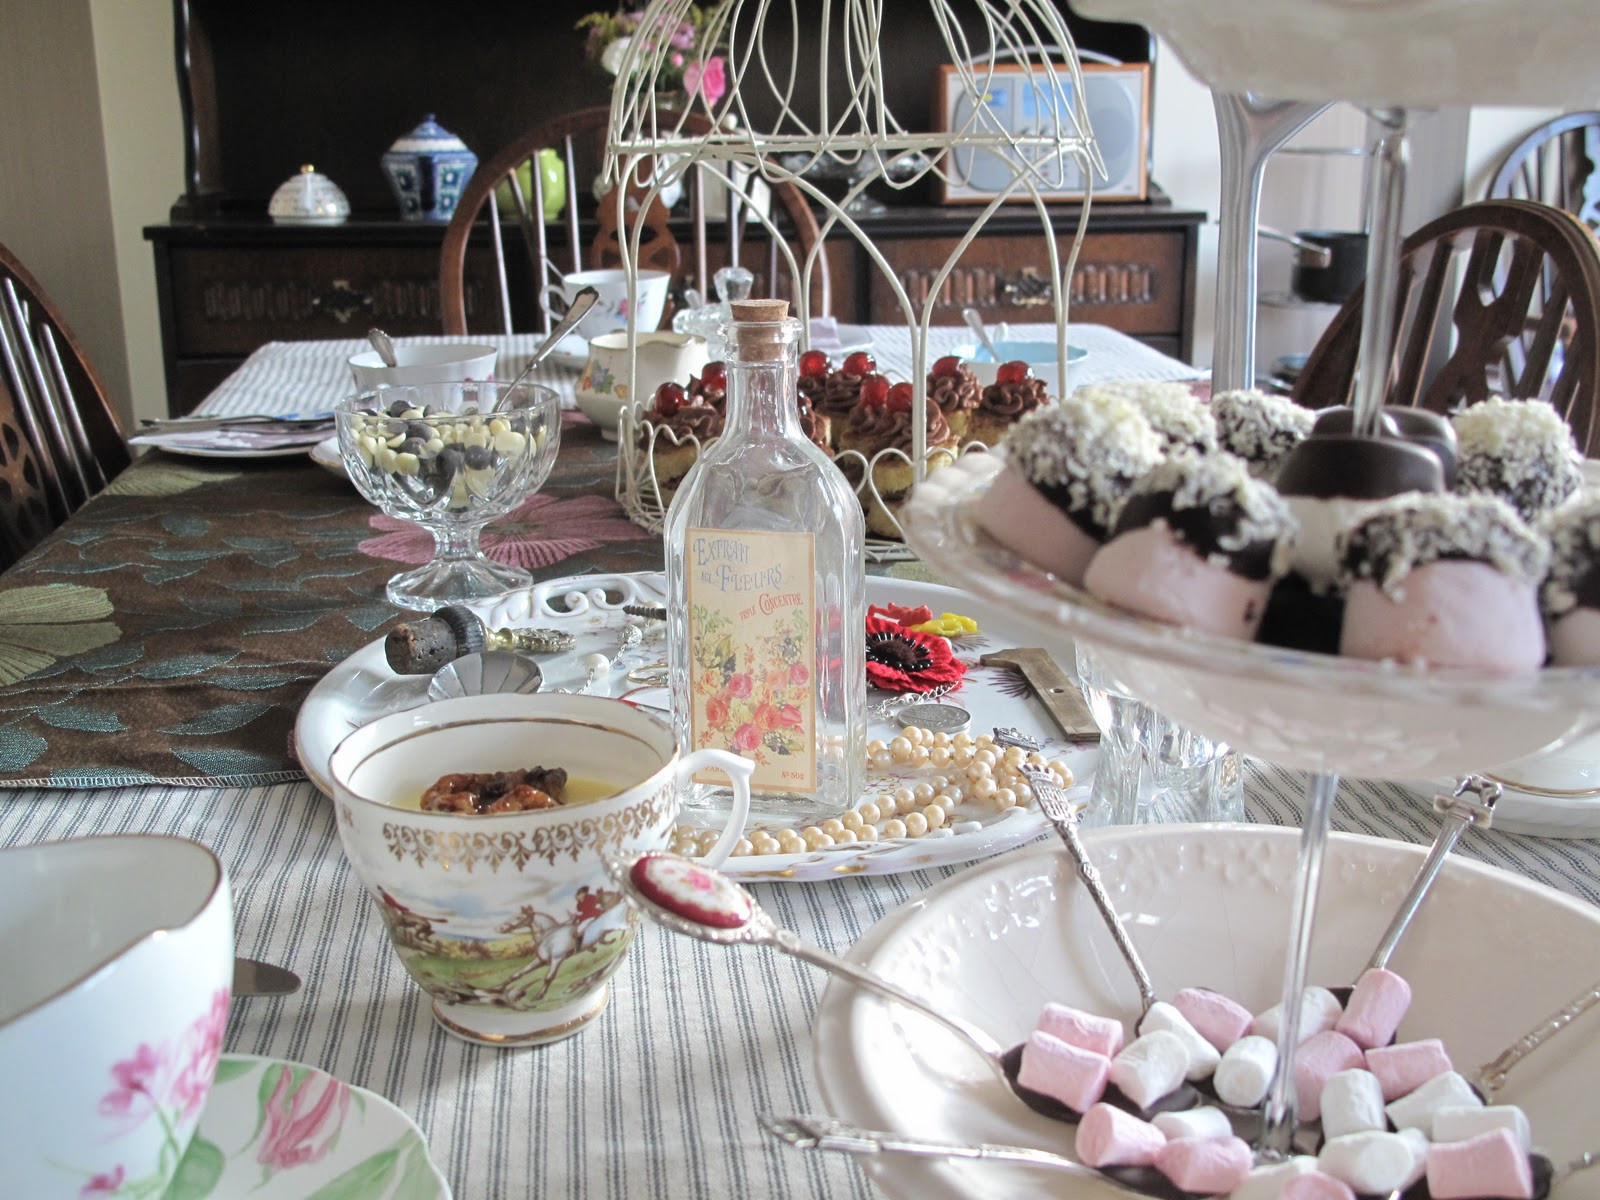 Table Setting Ideas For Tea Party
 The Secluded Tea Party A Midnight Feast Tea Party with